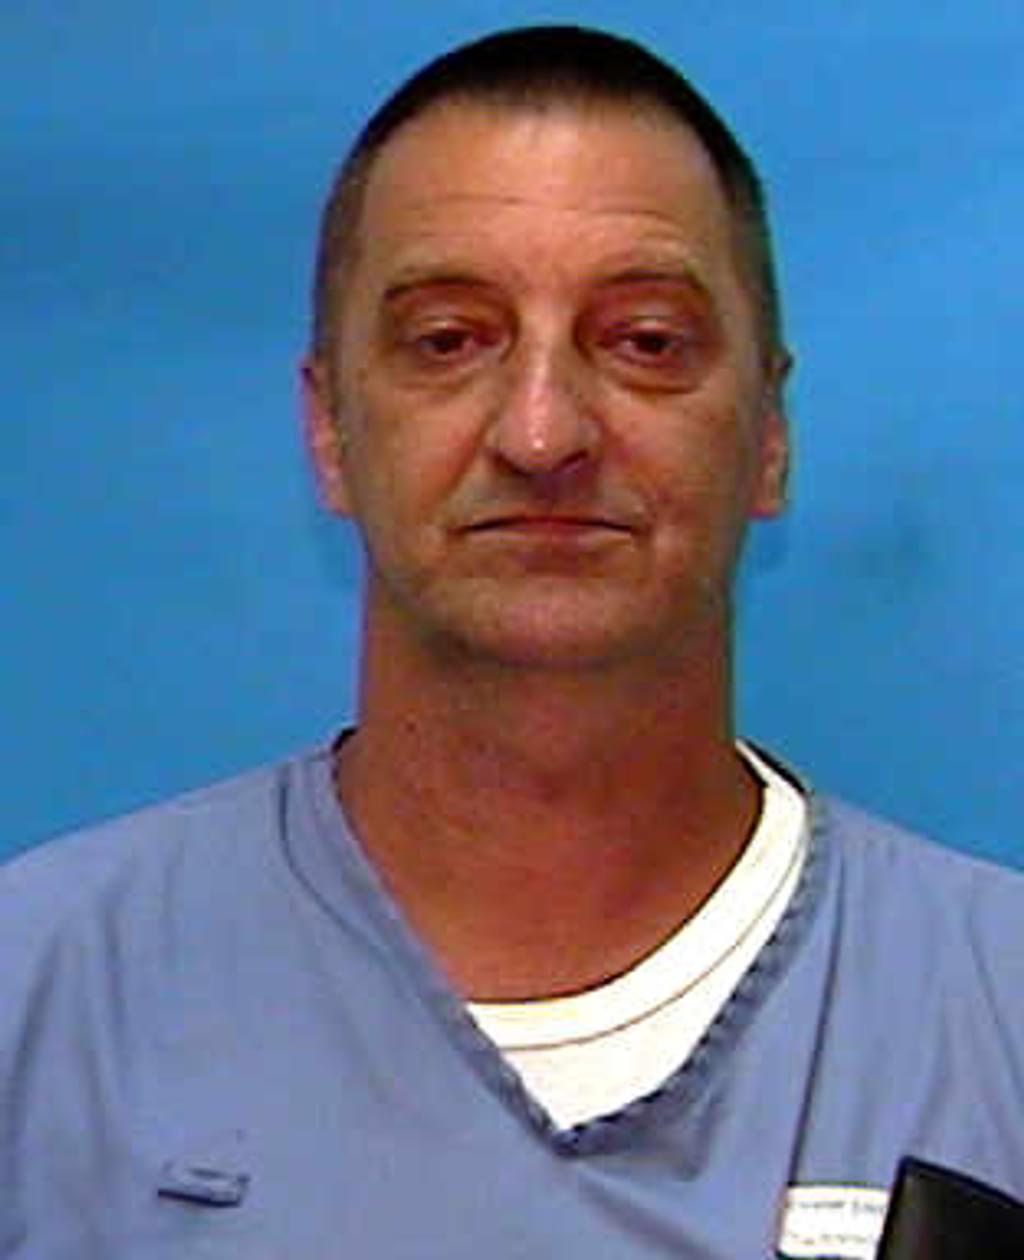 Florida Man Who Took Plea to Avoid Death Penalty Posthumously Exonerated of 1983 Rape-Murder